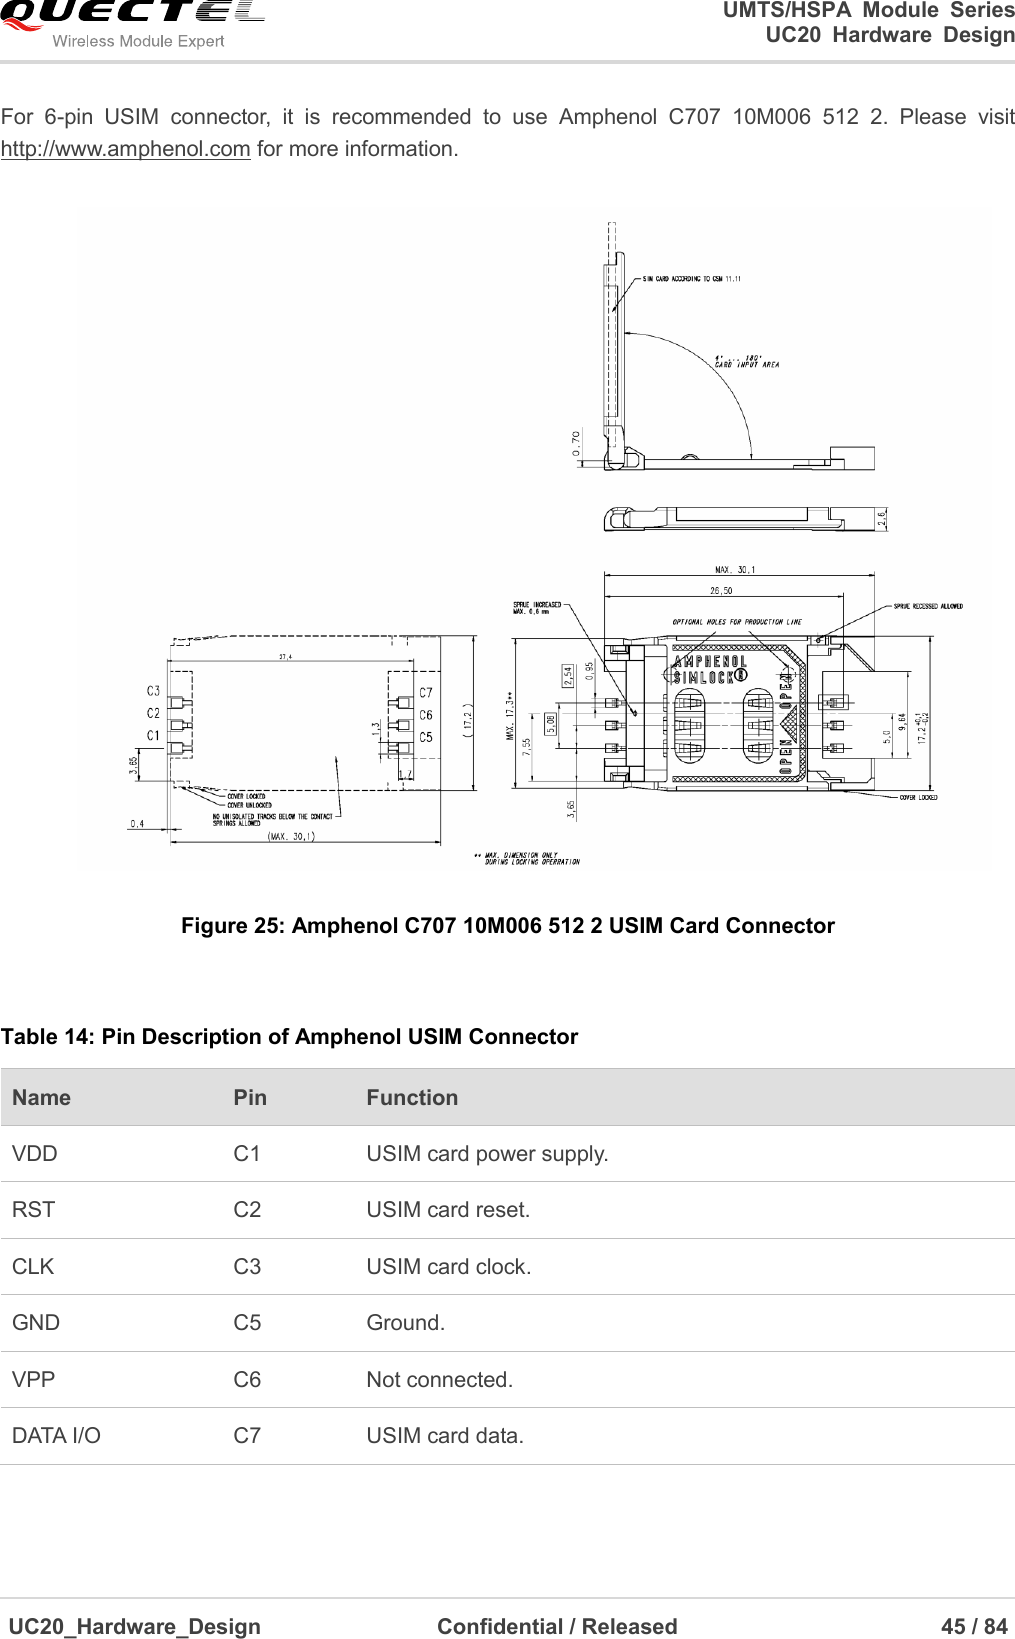                                                                                                                                               UMTS/HSPA  Module  Series                                                                 UC20  Hardware  Design  UC20_Hardware_Design                  Confidential / Released                            45 / 84     For  6-pin  USIM  connector,  it  is  recommended  to  use  Amphenol  C707  10M006  512  2.  Please  visit http://www.amphenol.com for more information.                 Figure 25: Amphenol C707 10M006 512 2 USIM Card Connector  Table 14: Pin Description of Amphenol USIM Connector Name Pin Function VDD C1 USIM card power supply. RST C2 USIM card reset. CLK C3 USIM card clock. GND C5 Ground. VPP C6 Not connected. DATA I/O C7 USIM card data.  